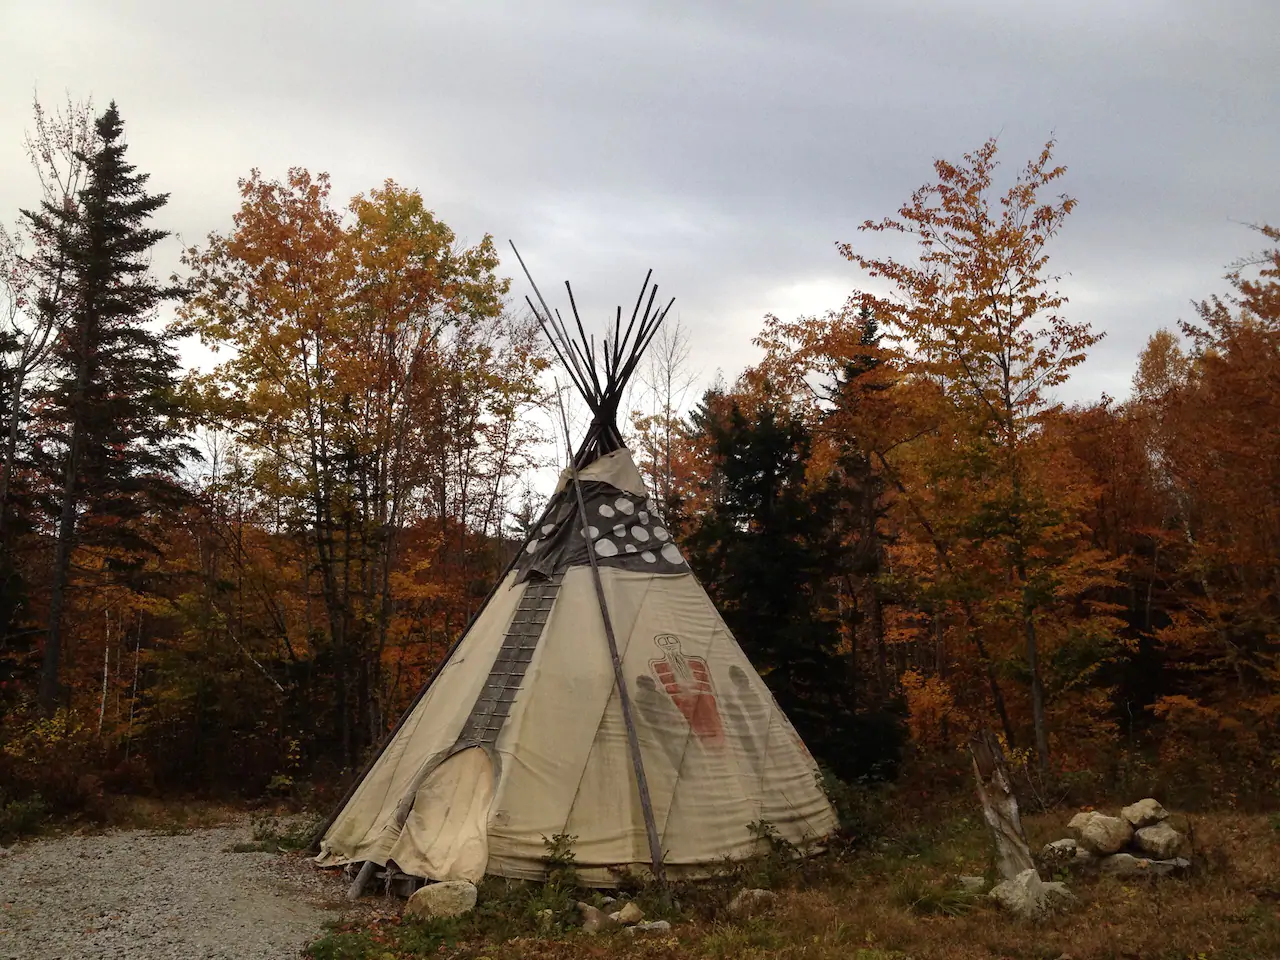 A brown and cream tipi sits surrounded by fall foliage as the sky turns dark grey.